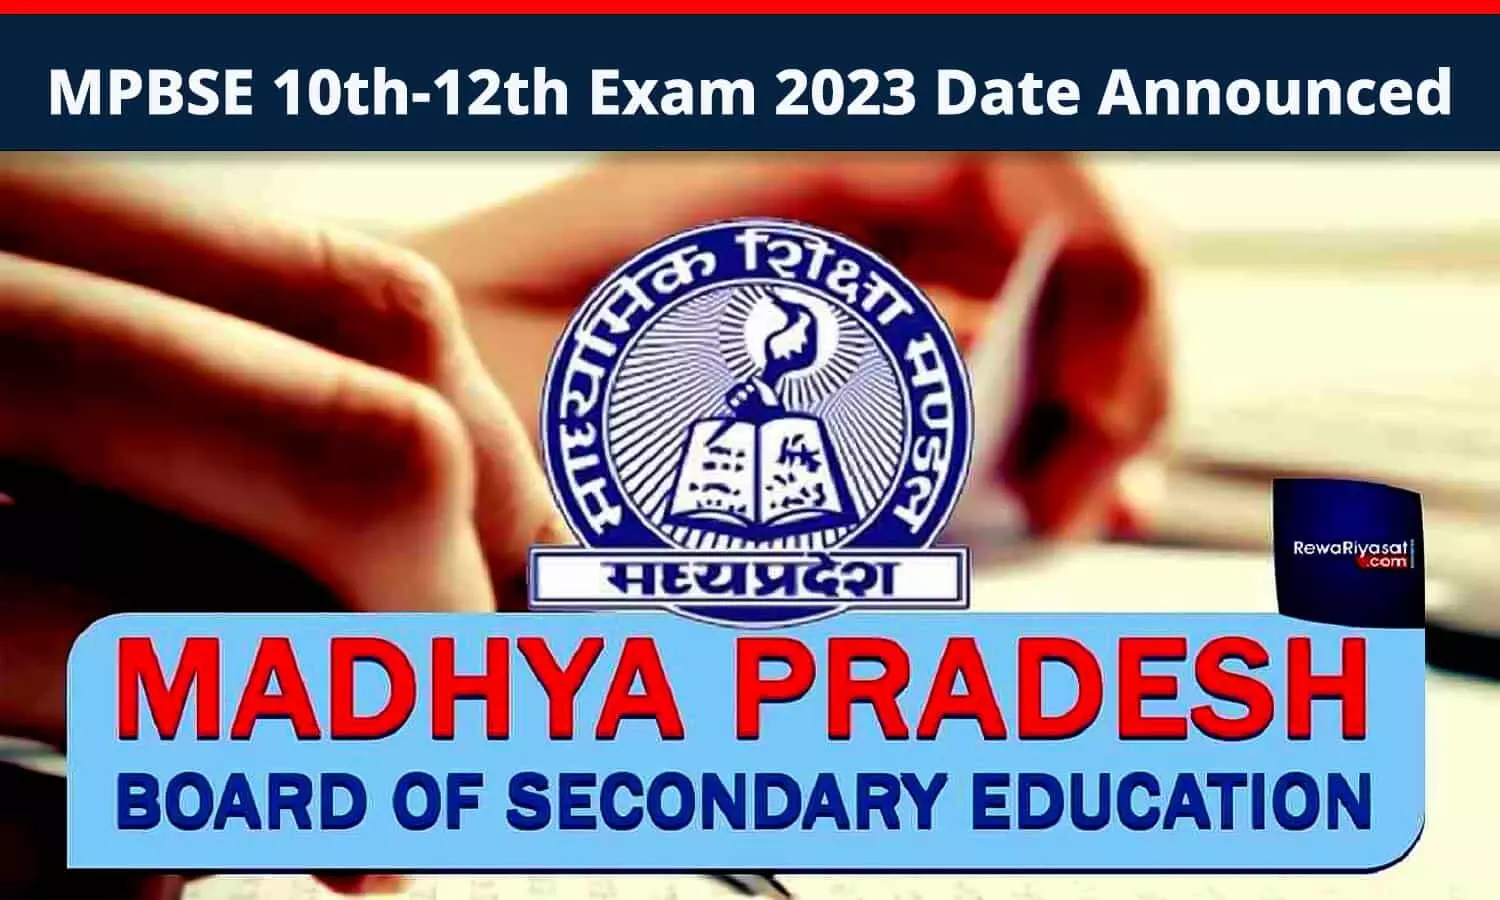 MPBSE 10th-12th Exam 2023 Date